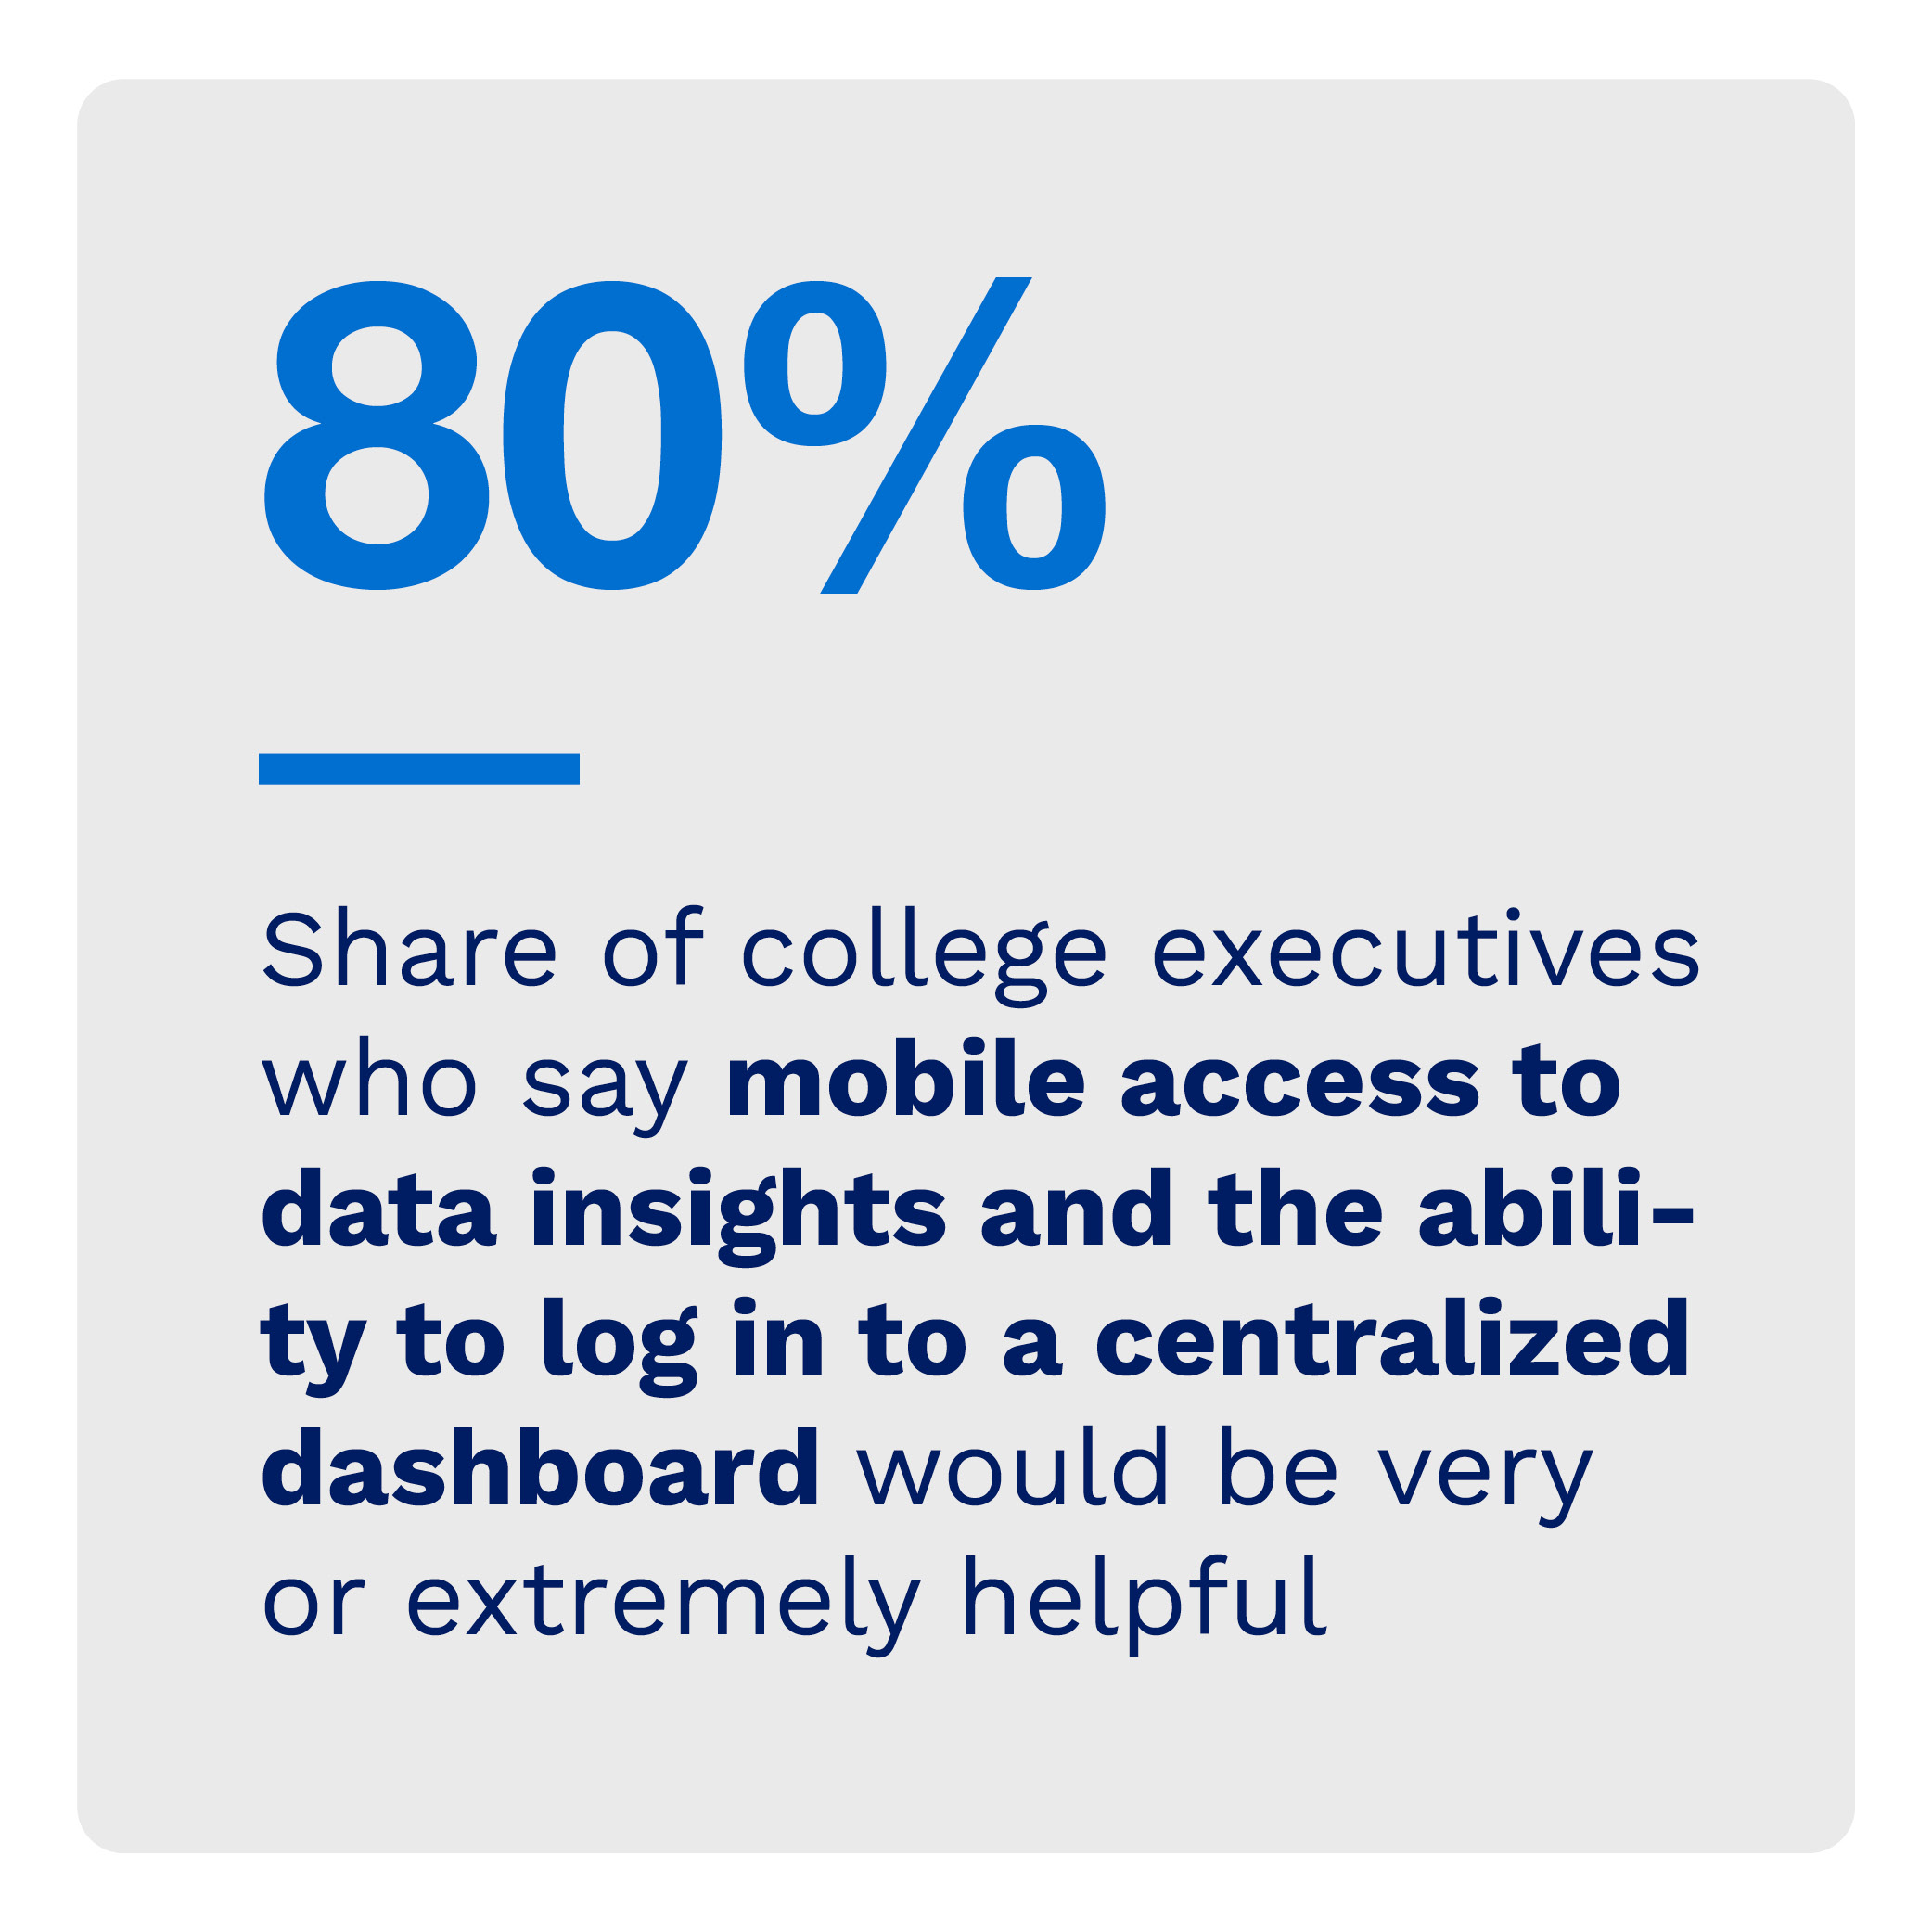 80%: Share of college executives who say mobile access to data insights and the ability to log in to a centralized dashboard would be very or extremely helpful